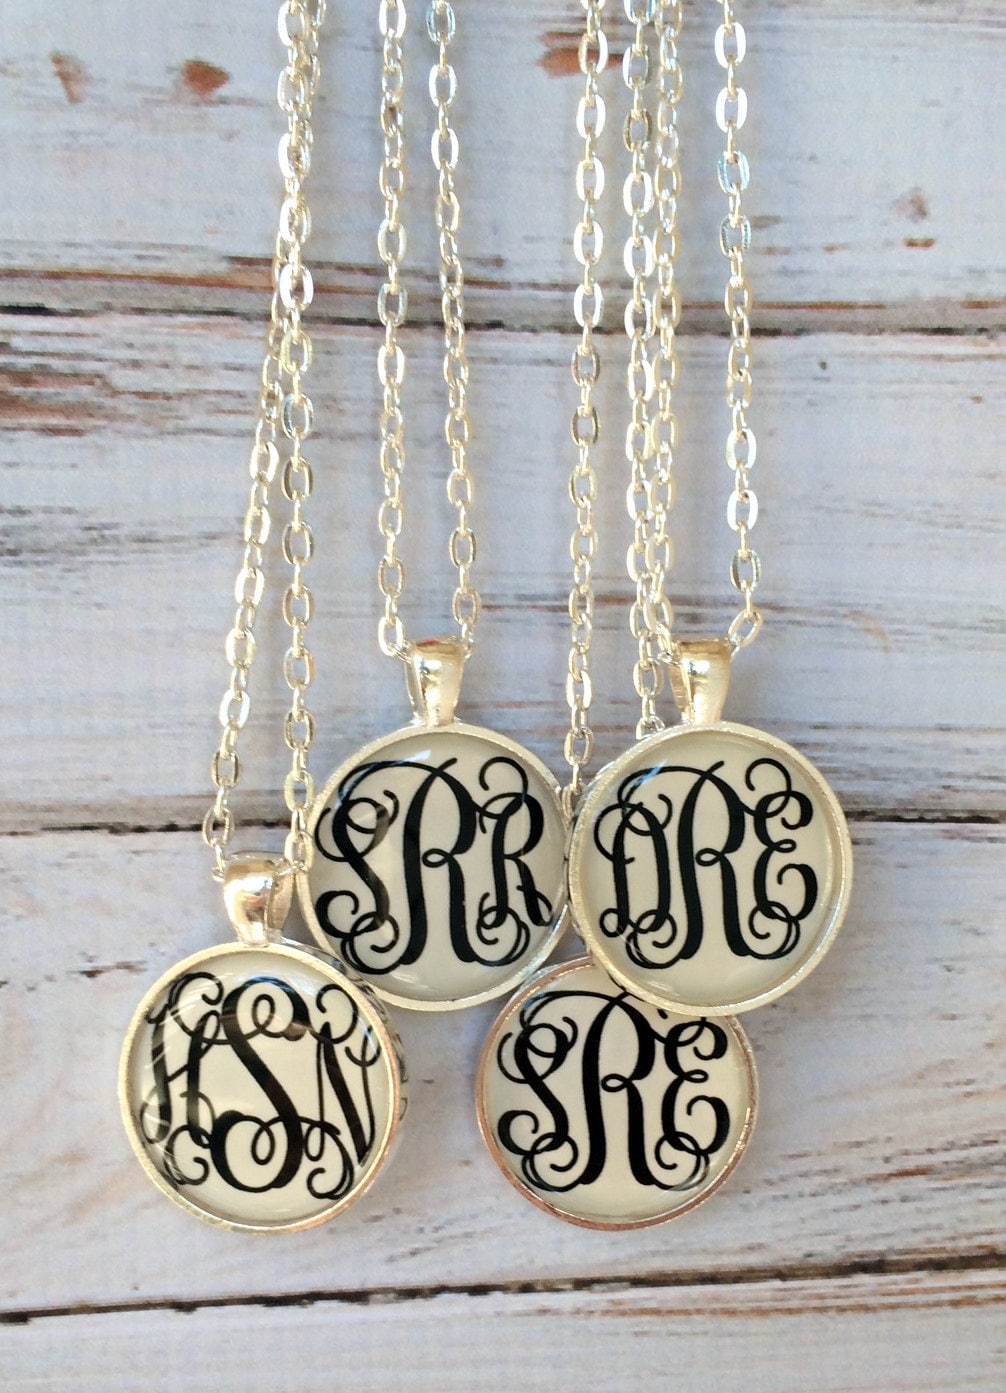 Silver Monogram necklace Monogrammed gifts by PoshBoutiqueGa